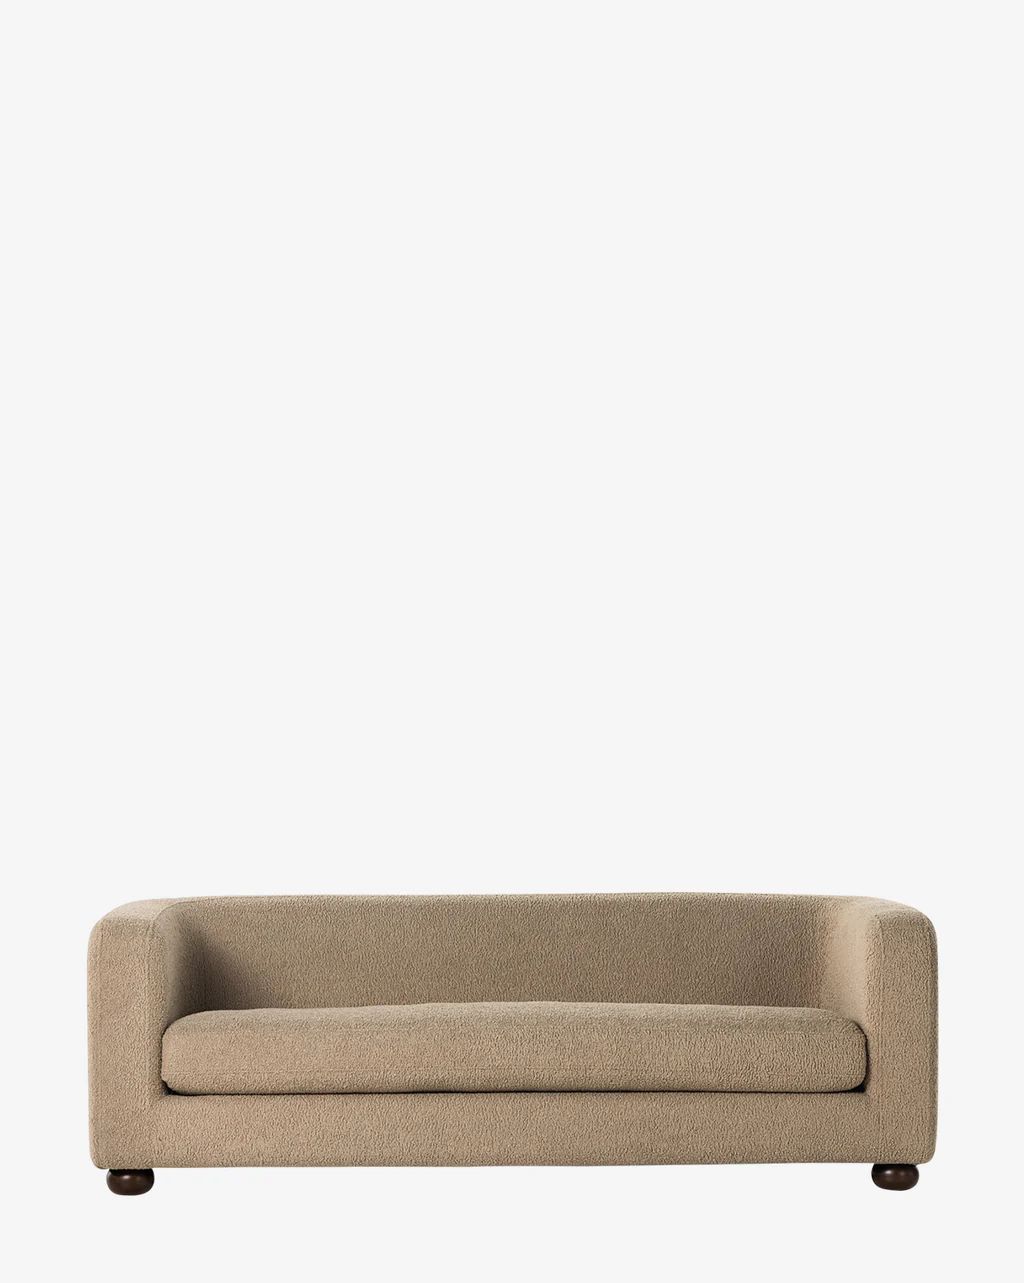 Quill Sofa | McGee & Co.